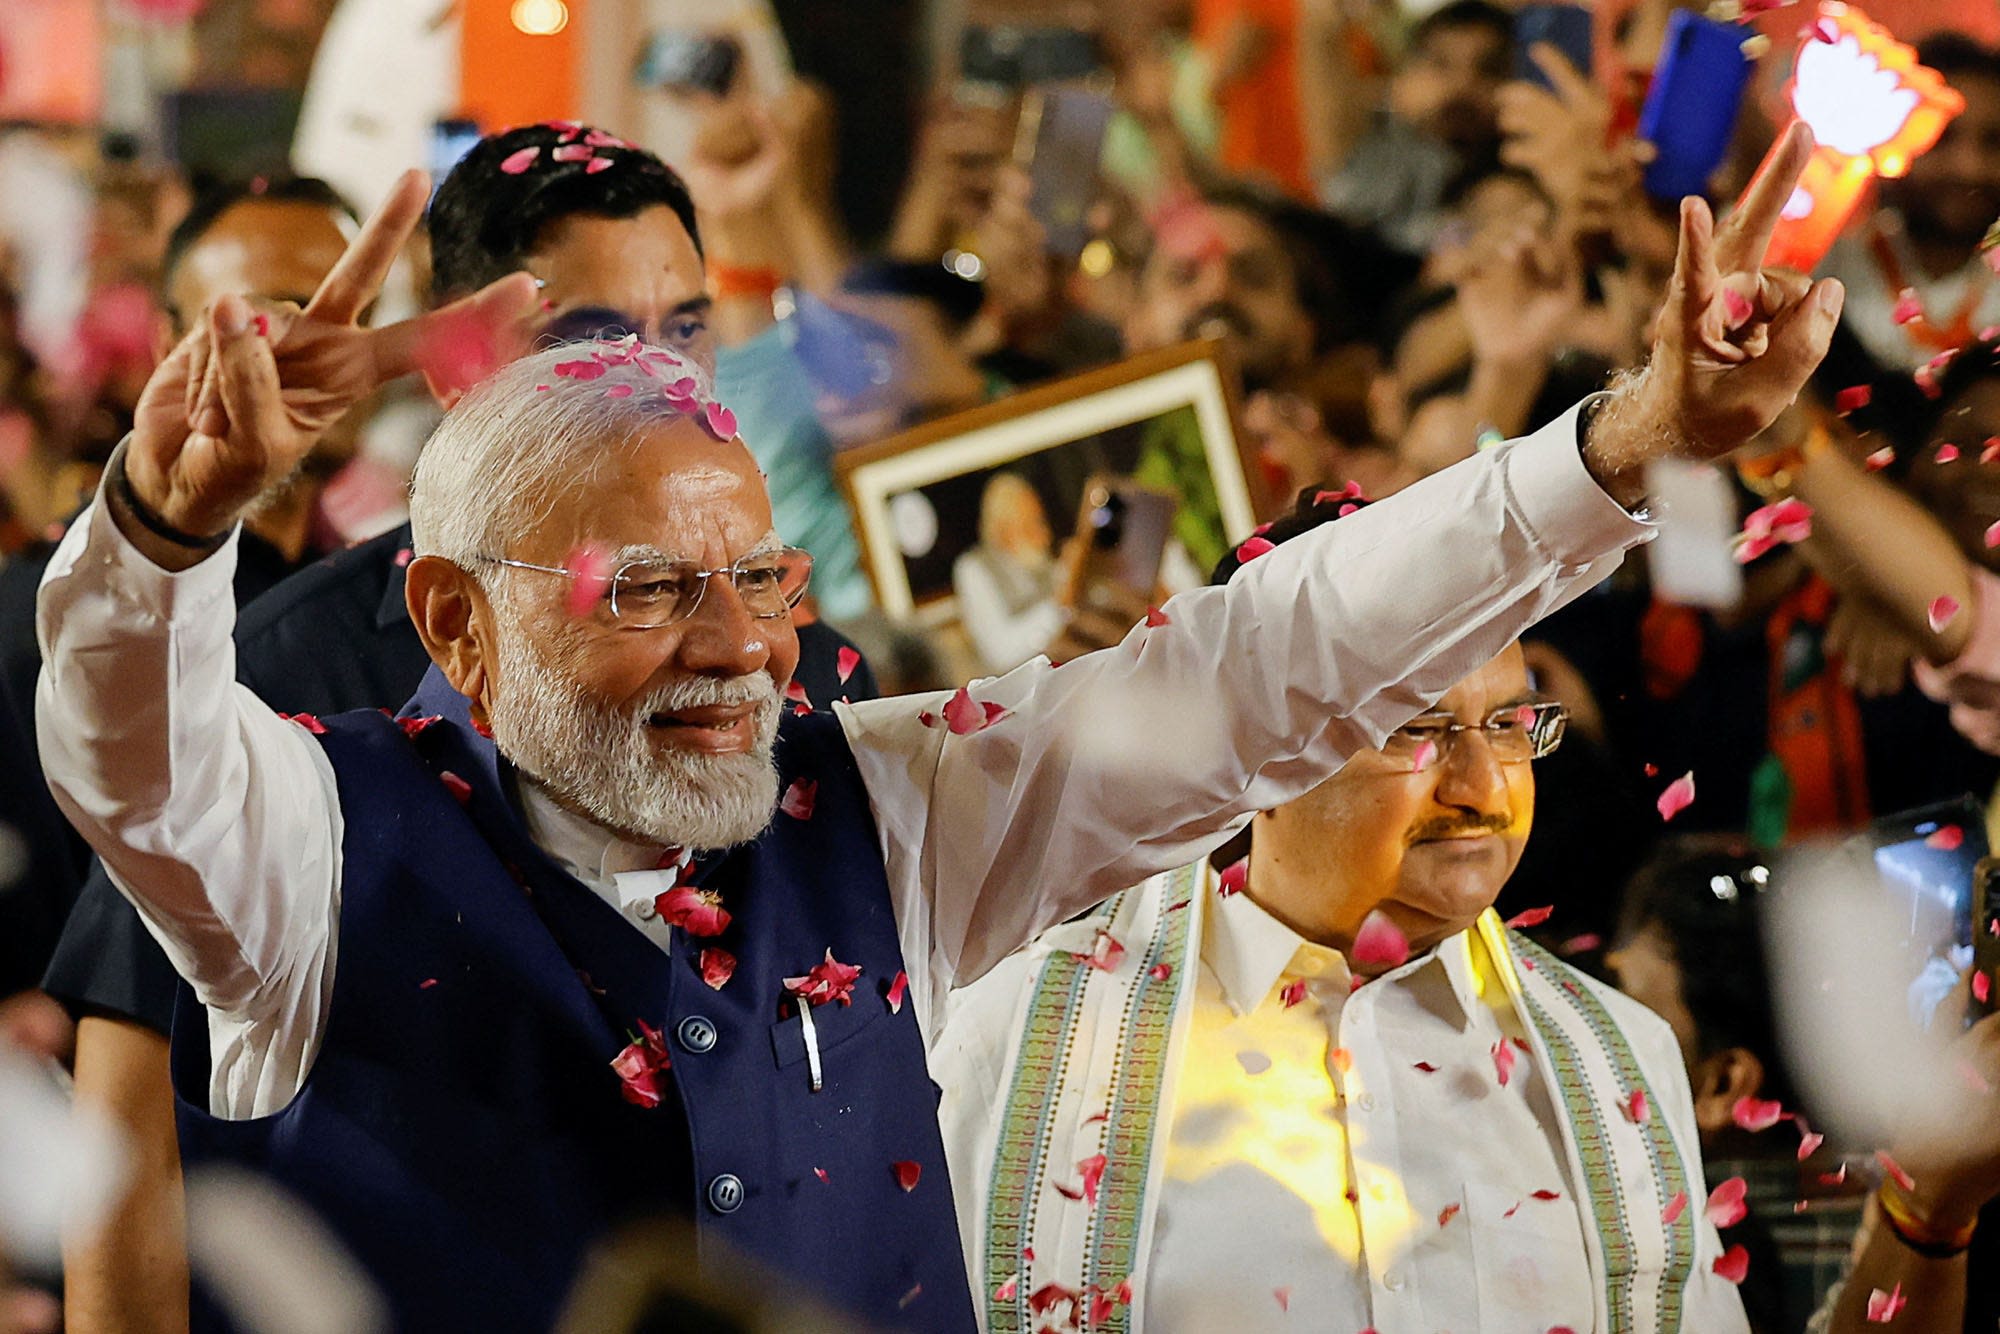 NJ Indian Americans react to Prime Minister Modi's surprisingly close election victory